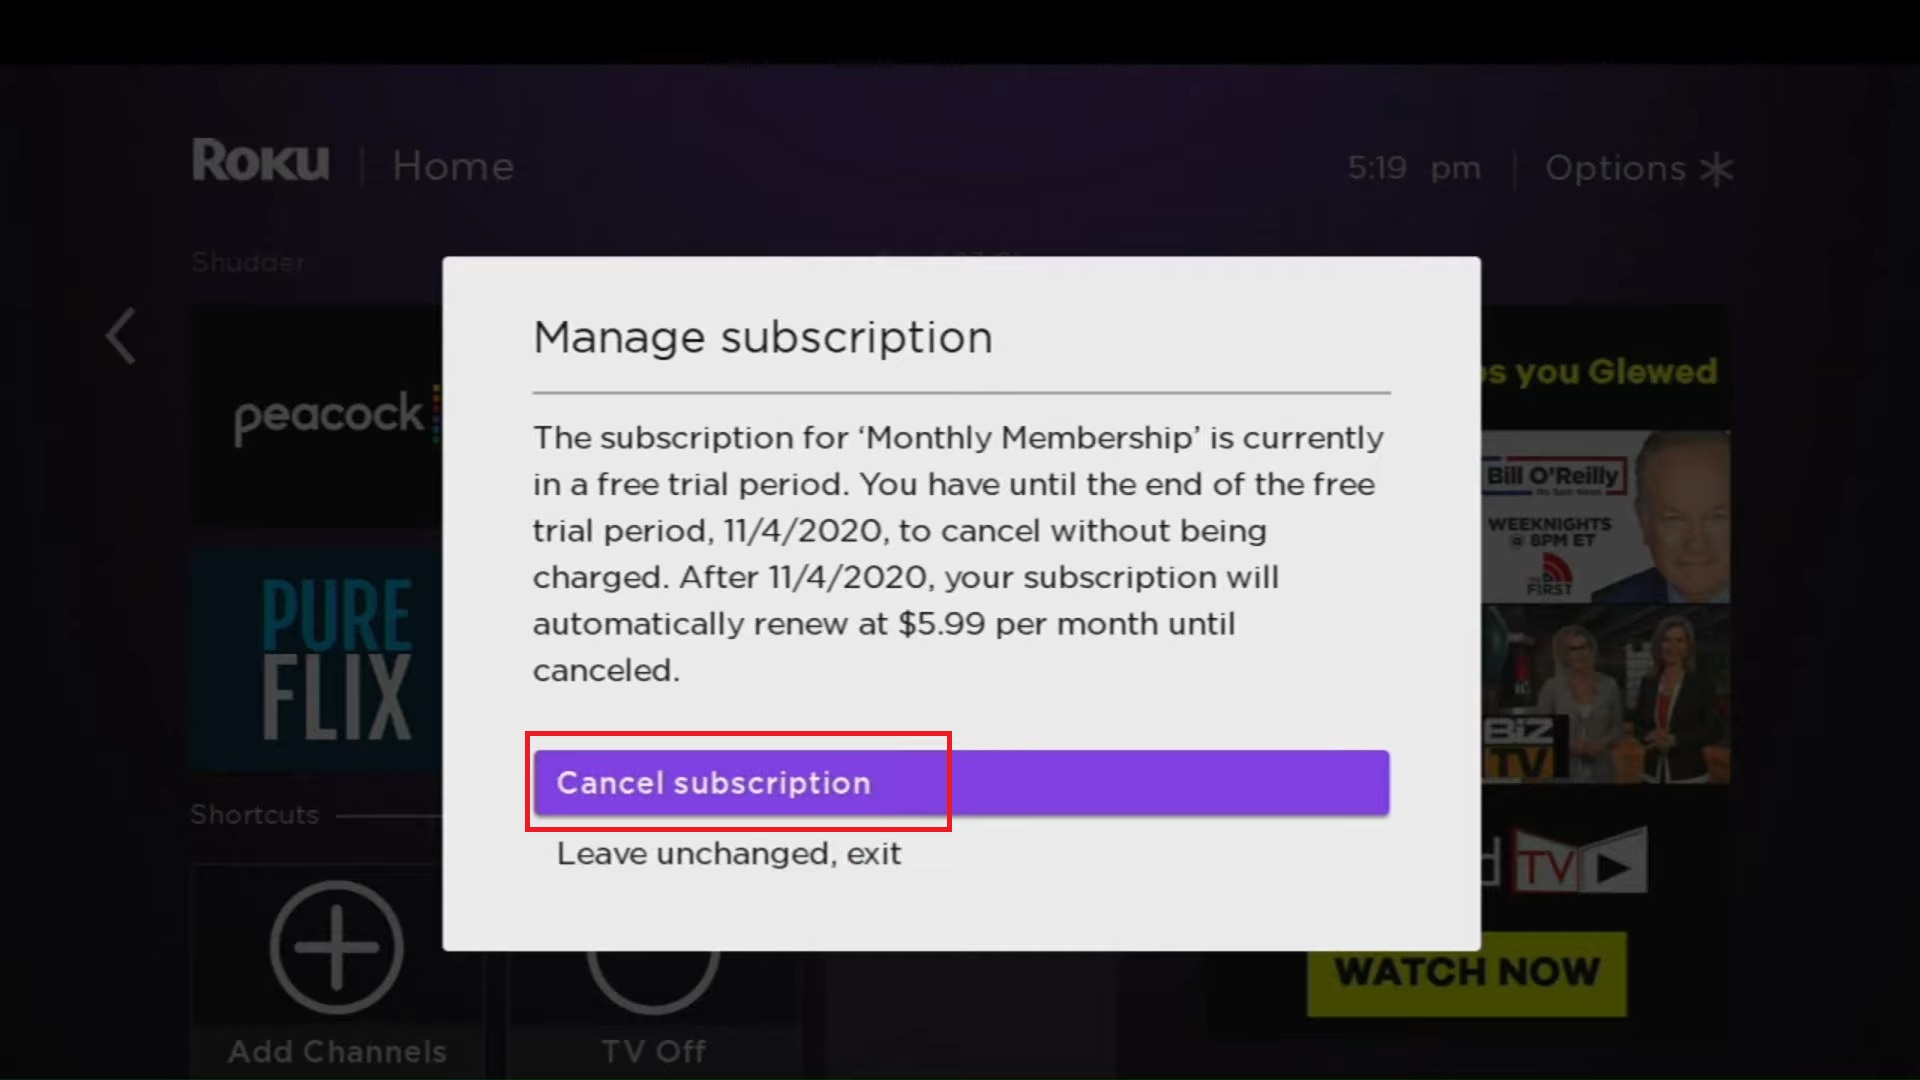 Click on Cancel Subscription.